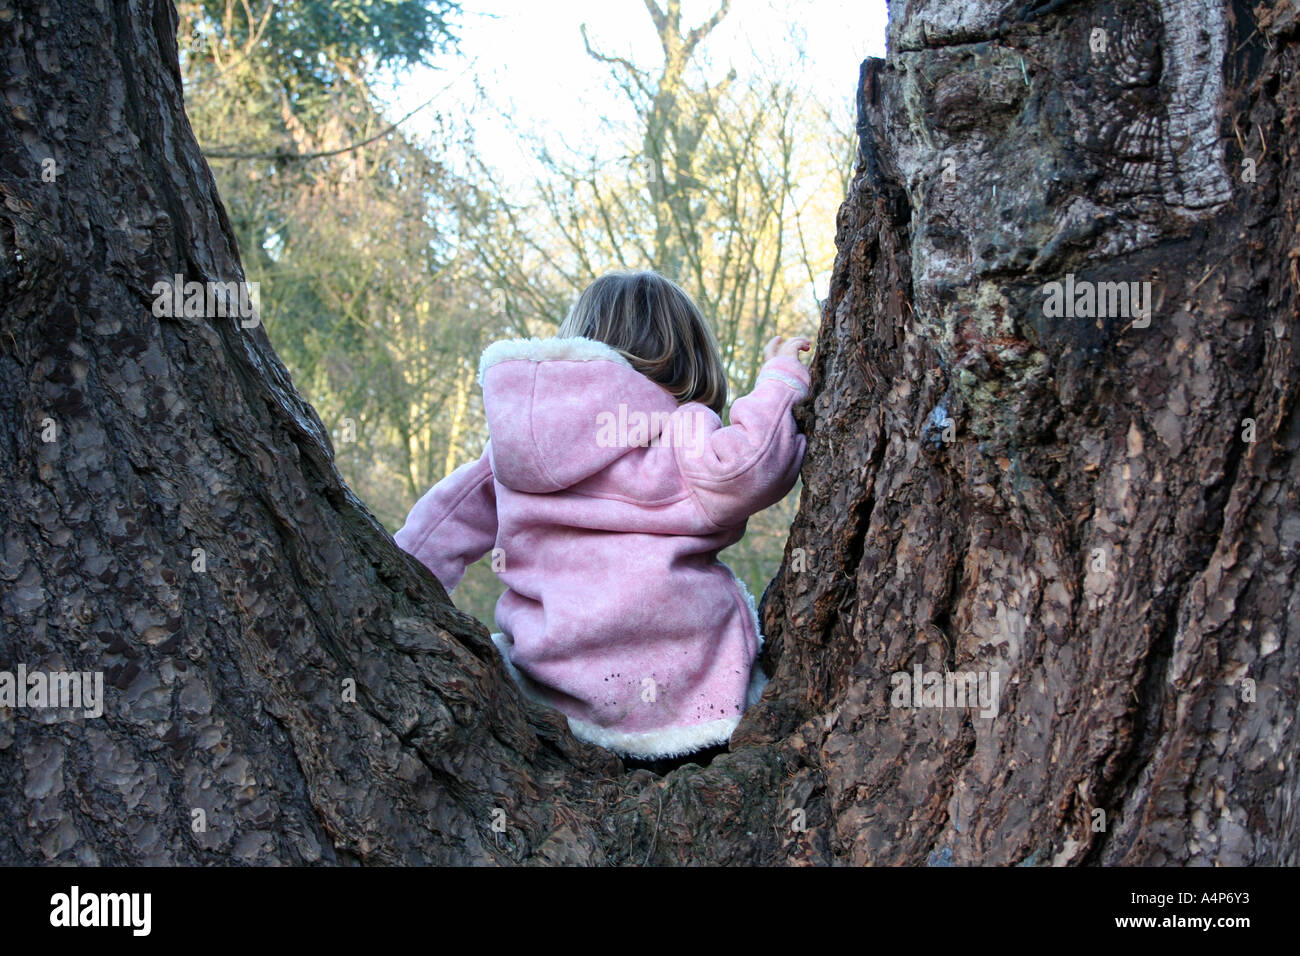 Young girl Old tree Stock Photo